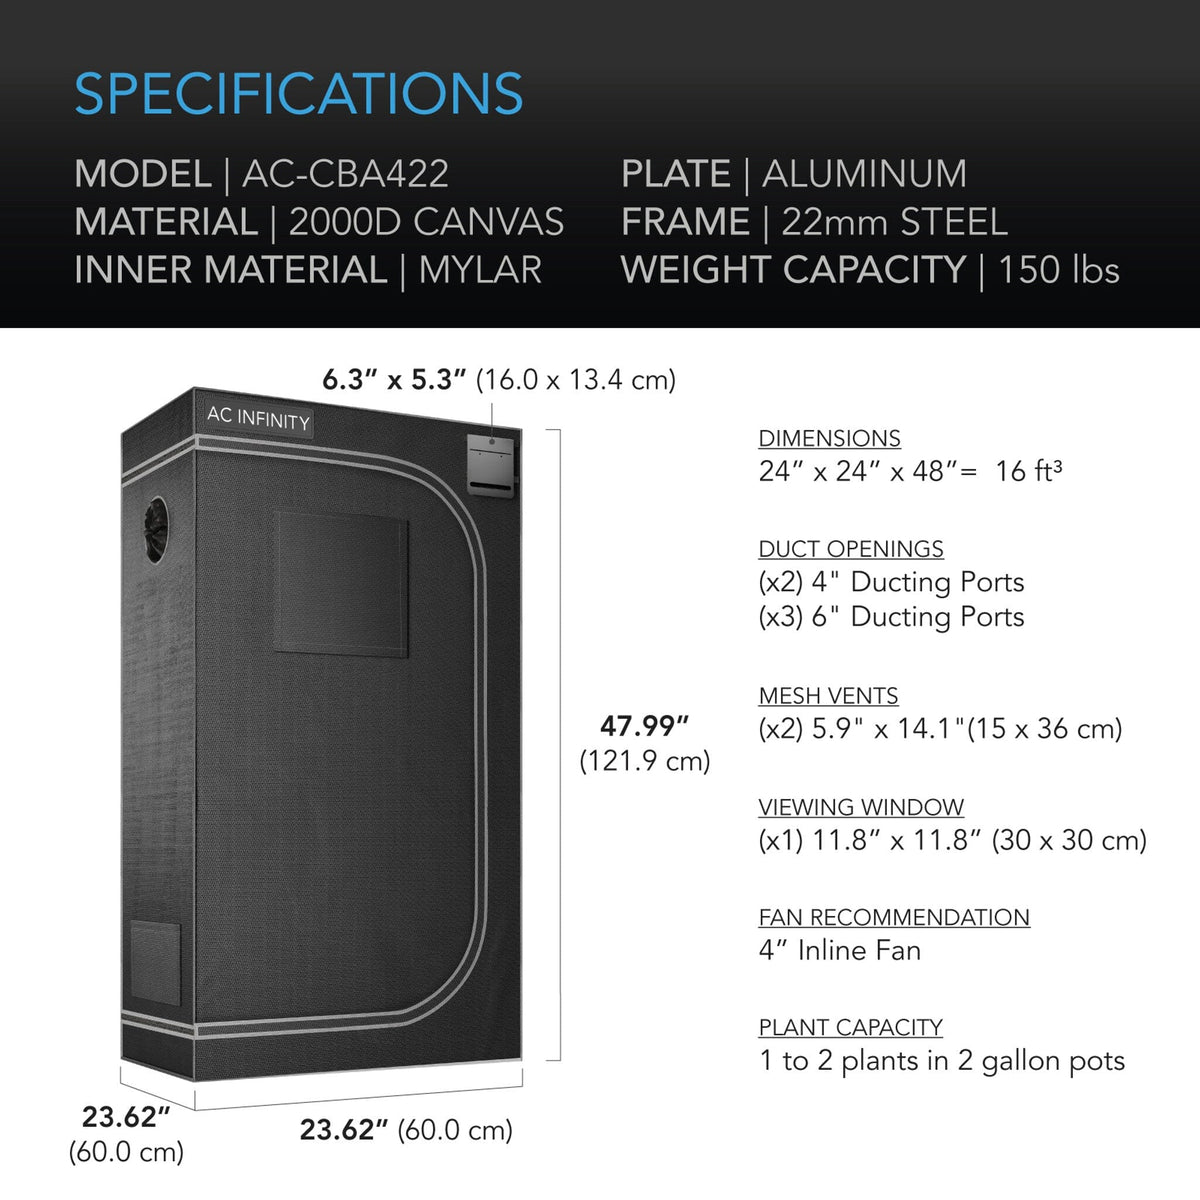 Cloudlab 422 specifications